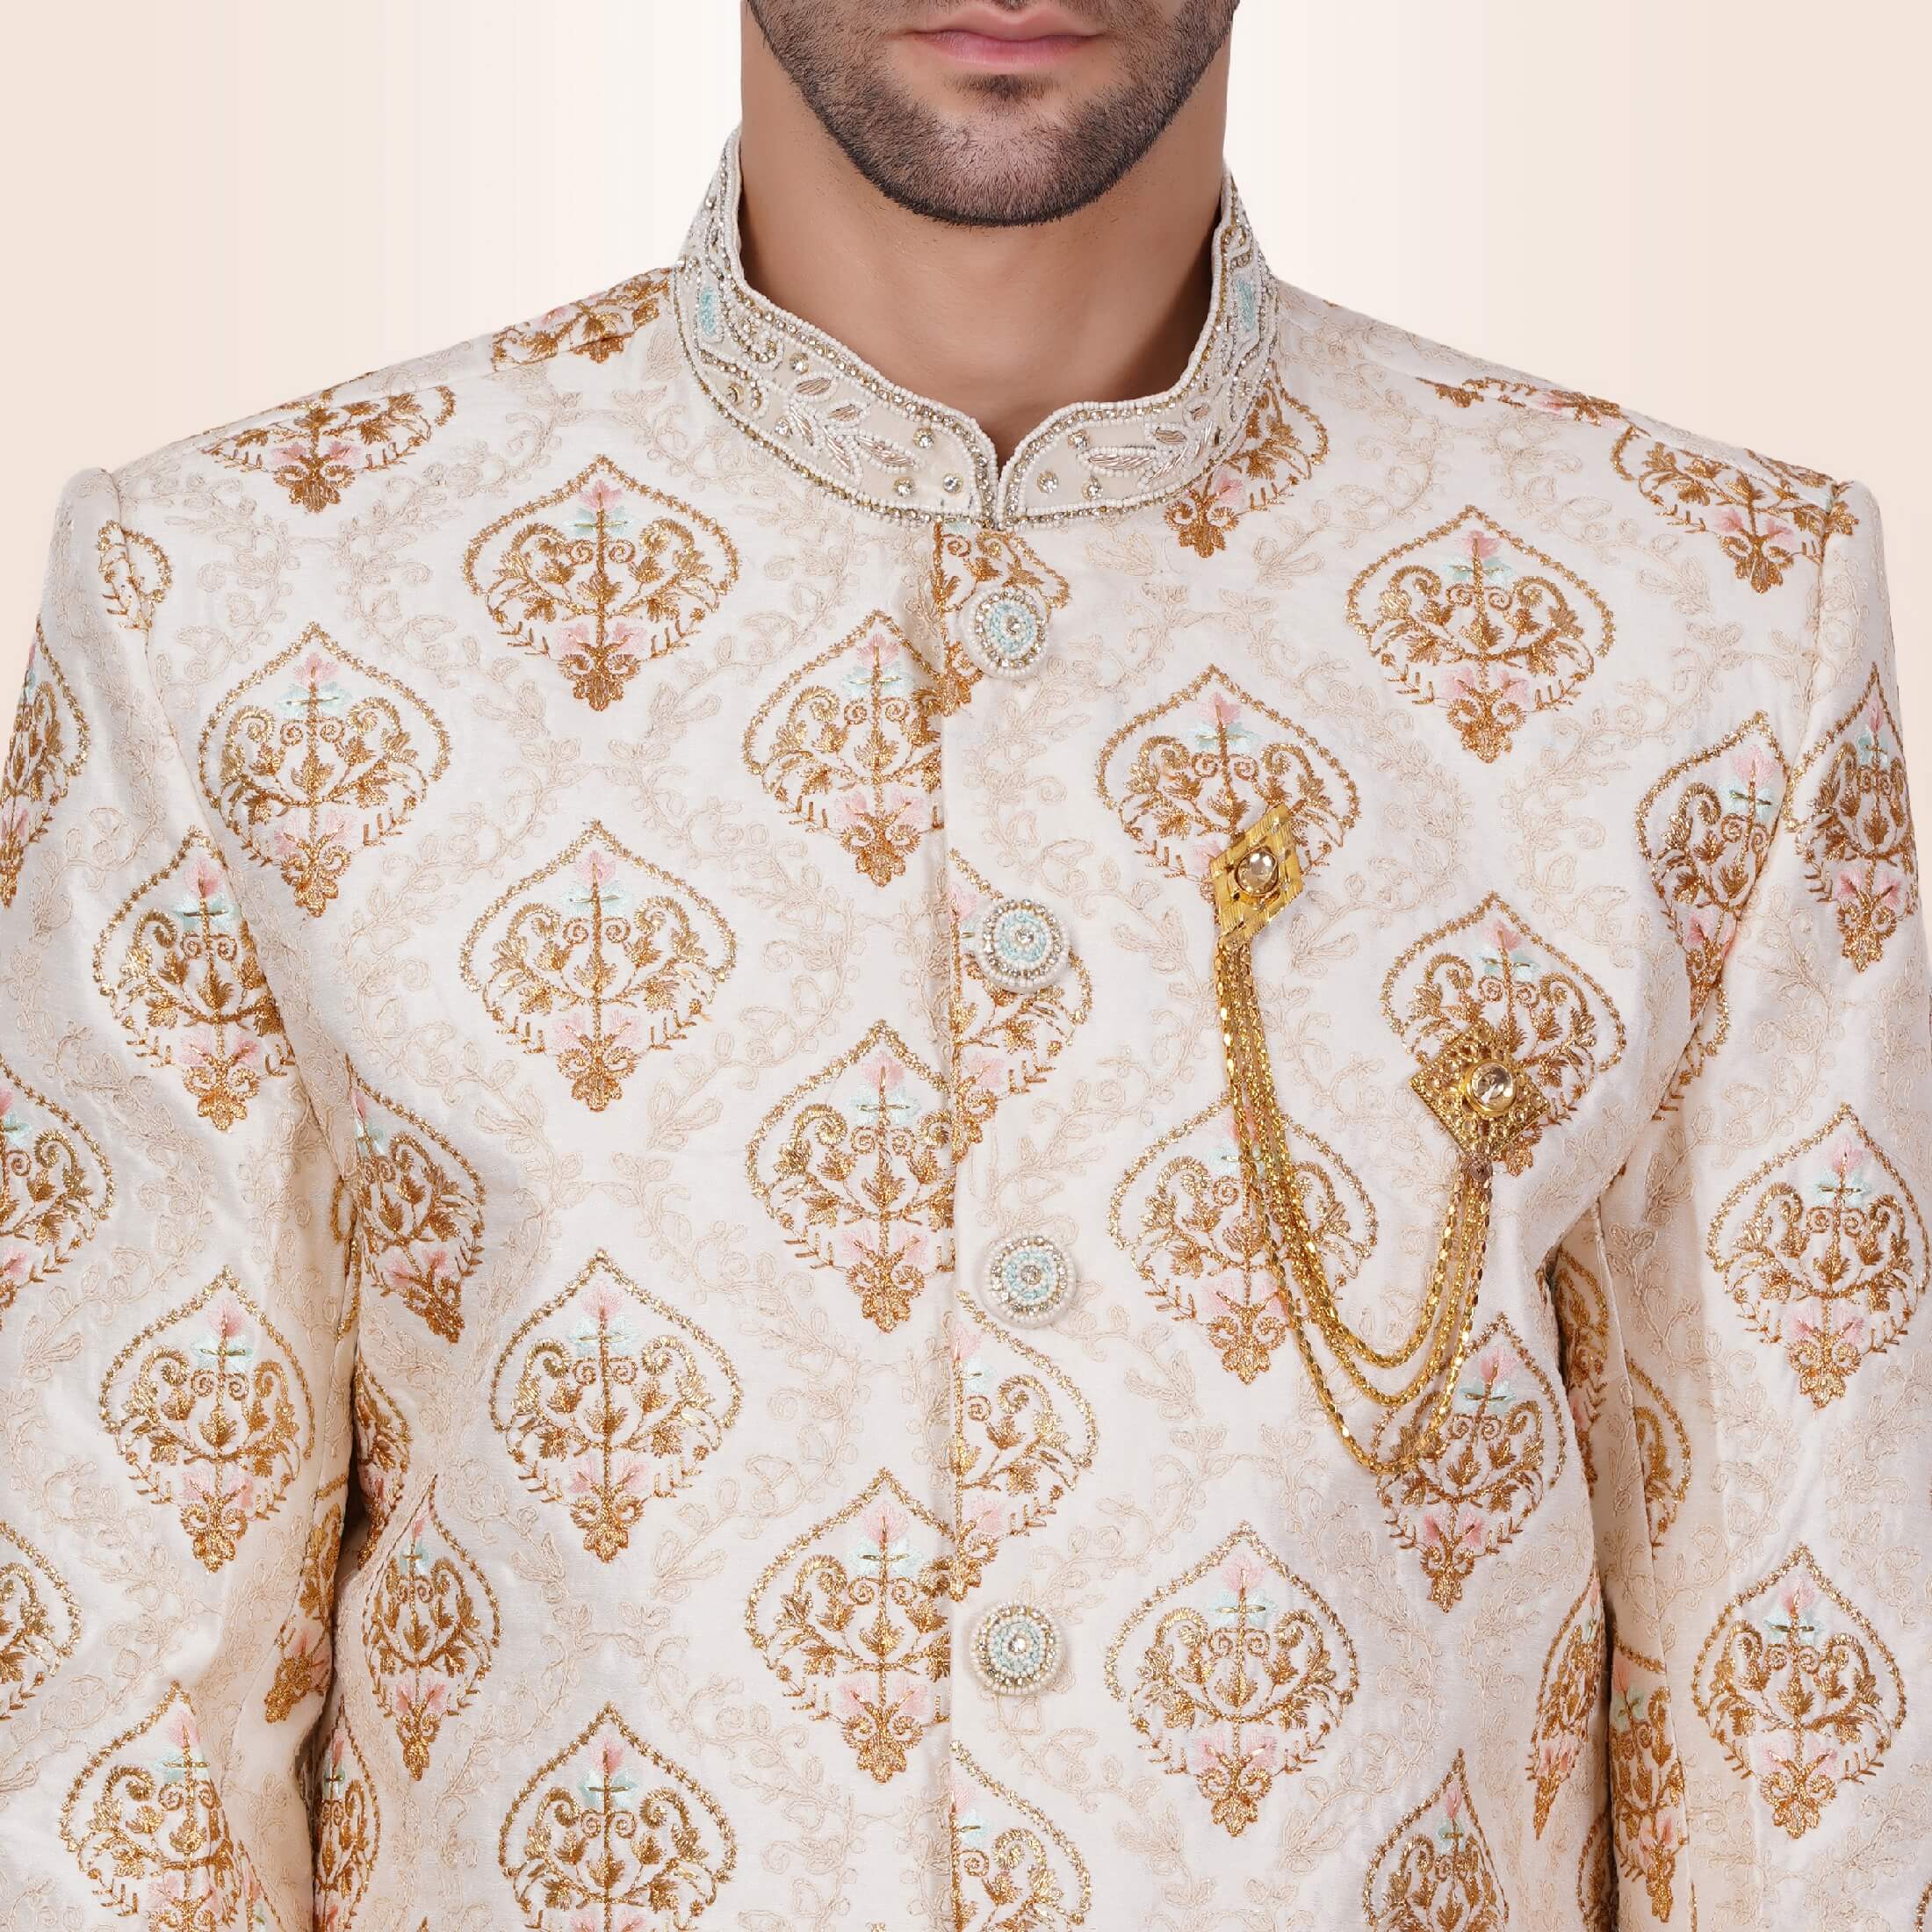 Green and Gold Colour Designer Exclusive Wedding Wear Sherwani Suit D.